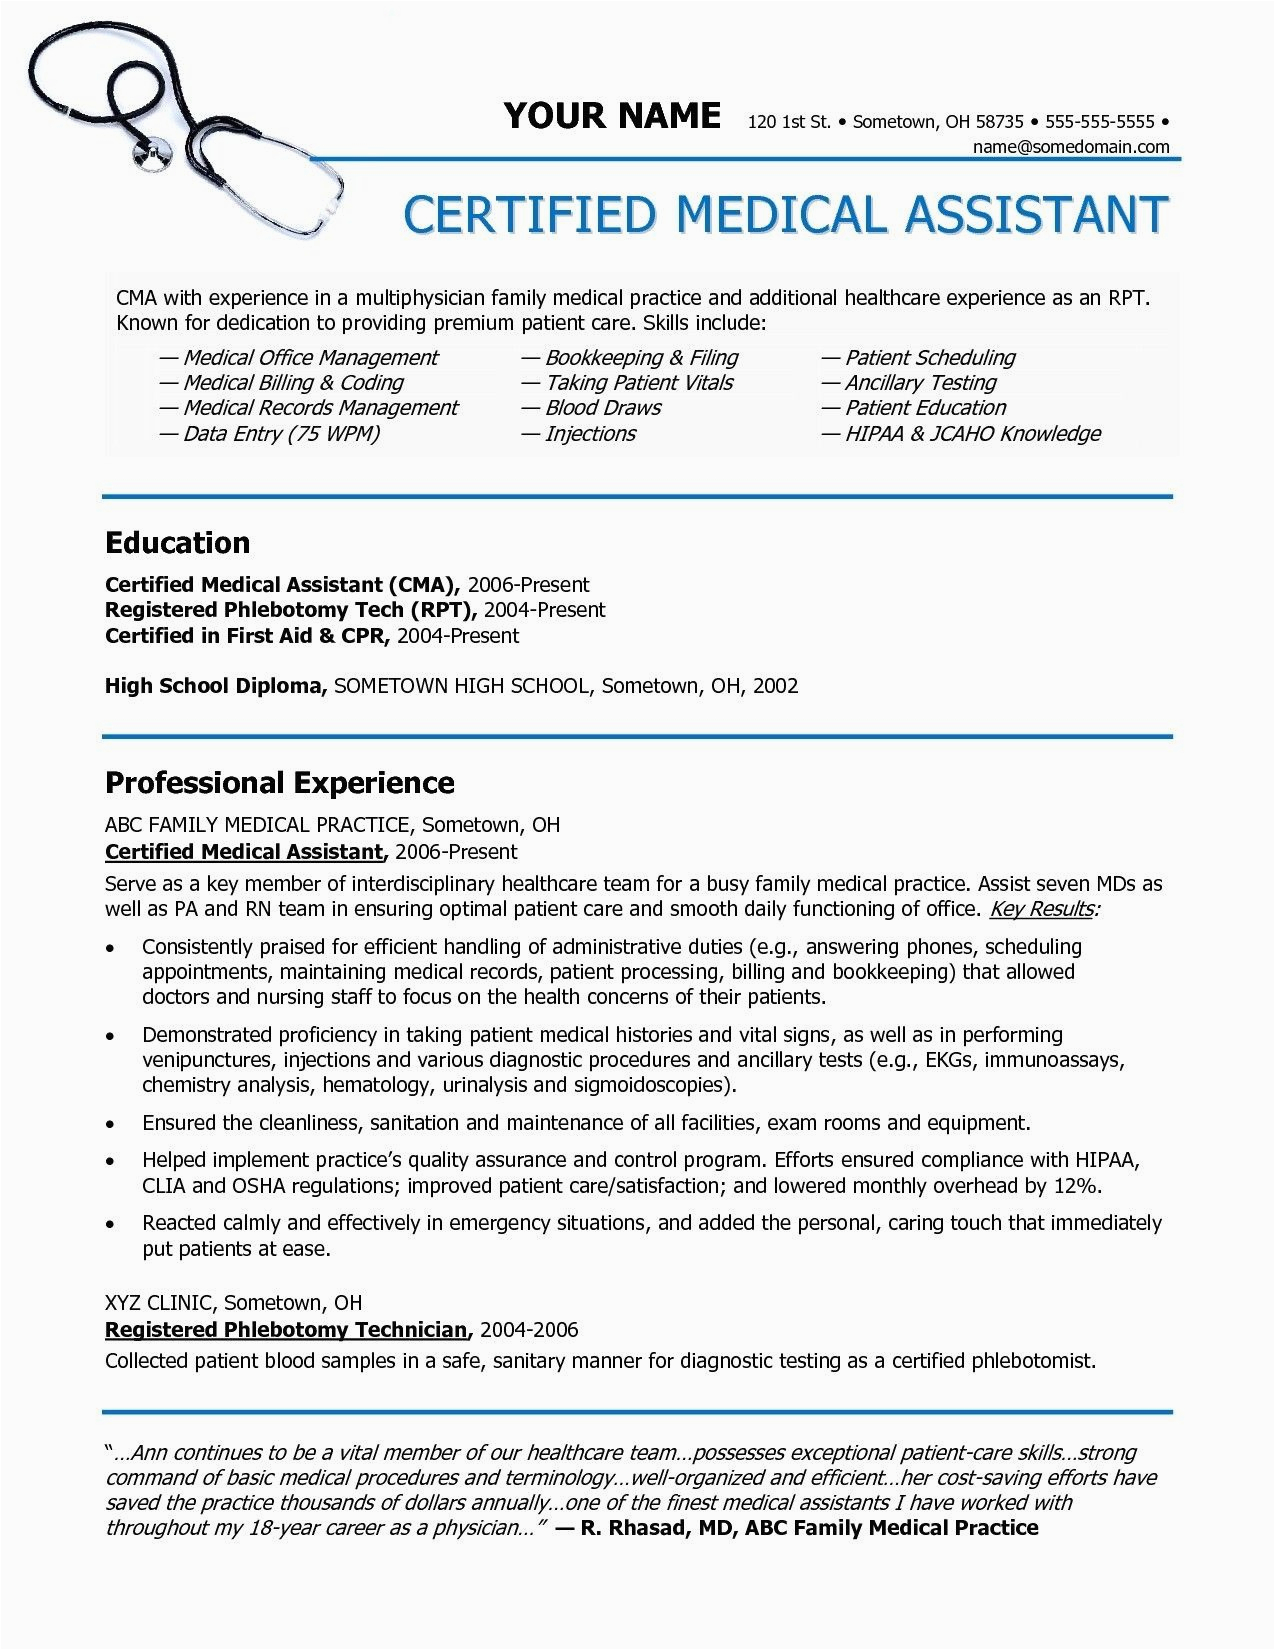 Sample Resume format for Medical Biller Medical assistant 78 Beautiful S Resume Objective Examples for Medical Coding and